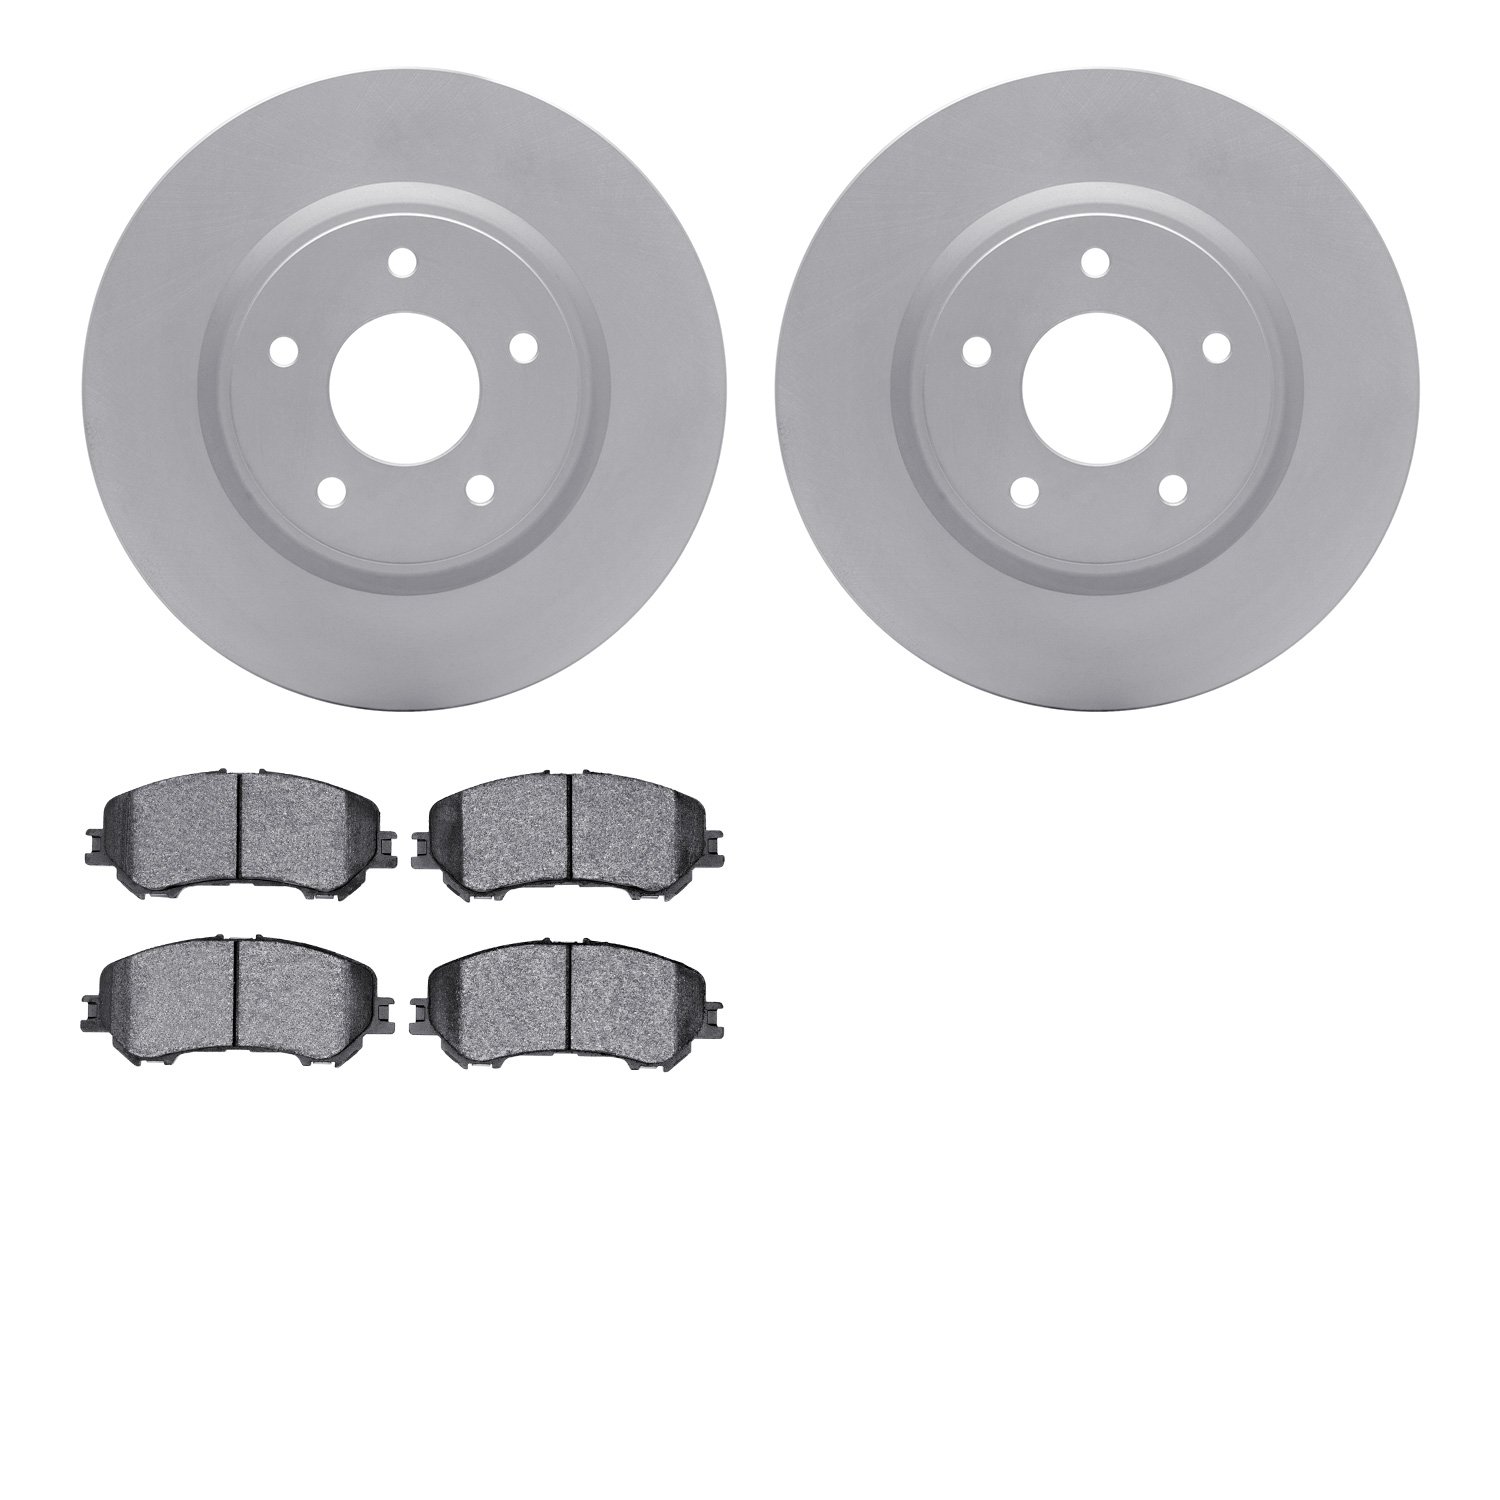 4302-67066 Geospec Brake Rotors with 3000-Series Ceramic Brake Pads Kit, Fits Select Multiple Makes/Models, Position: Front